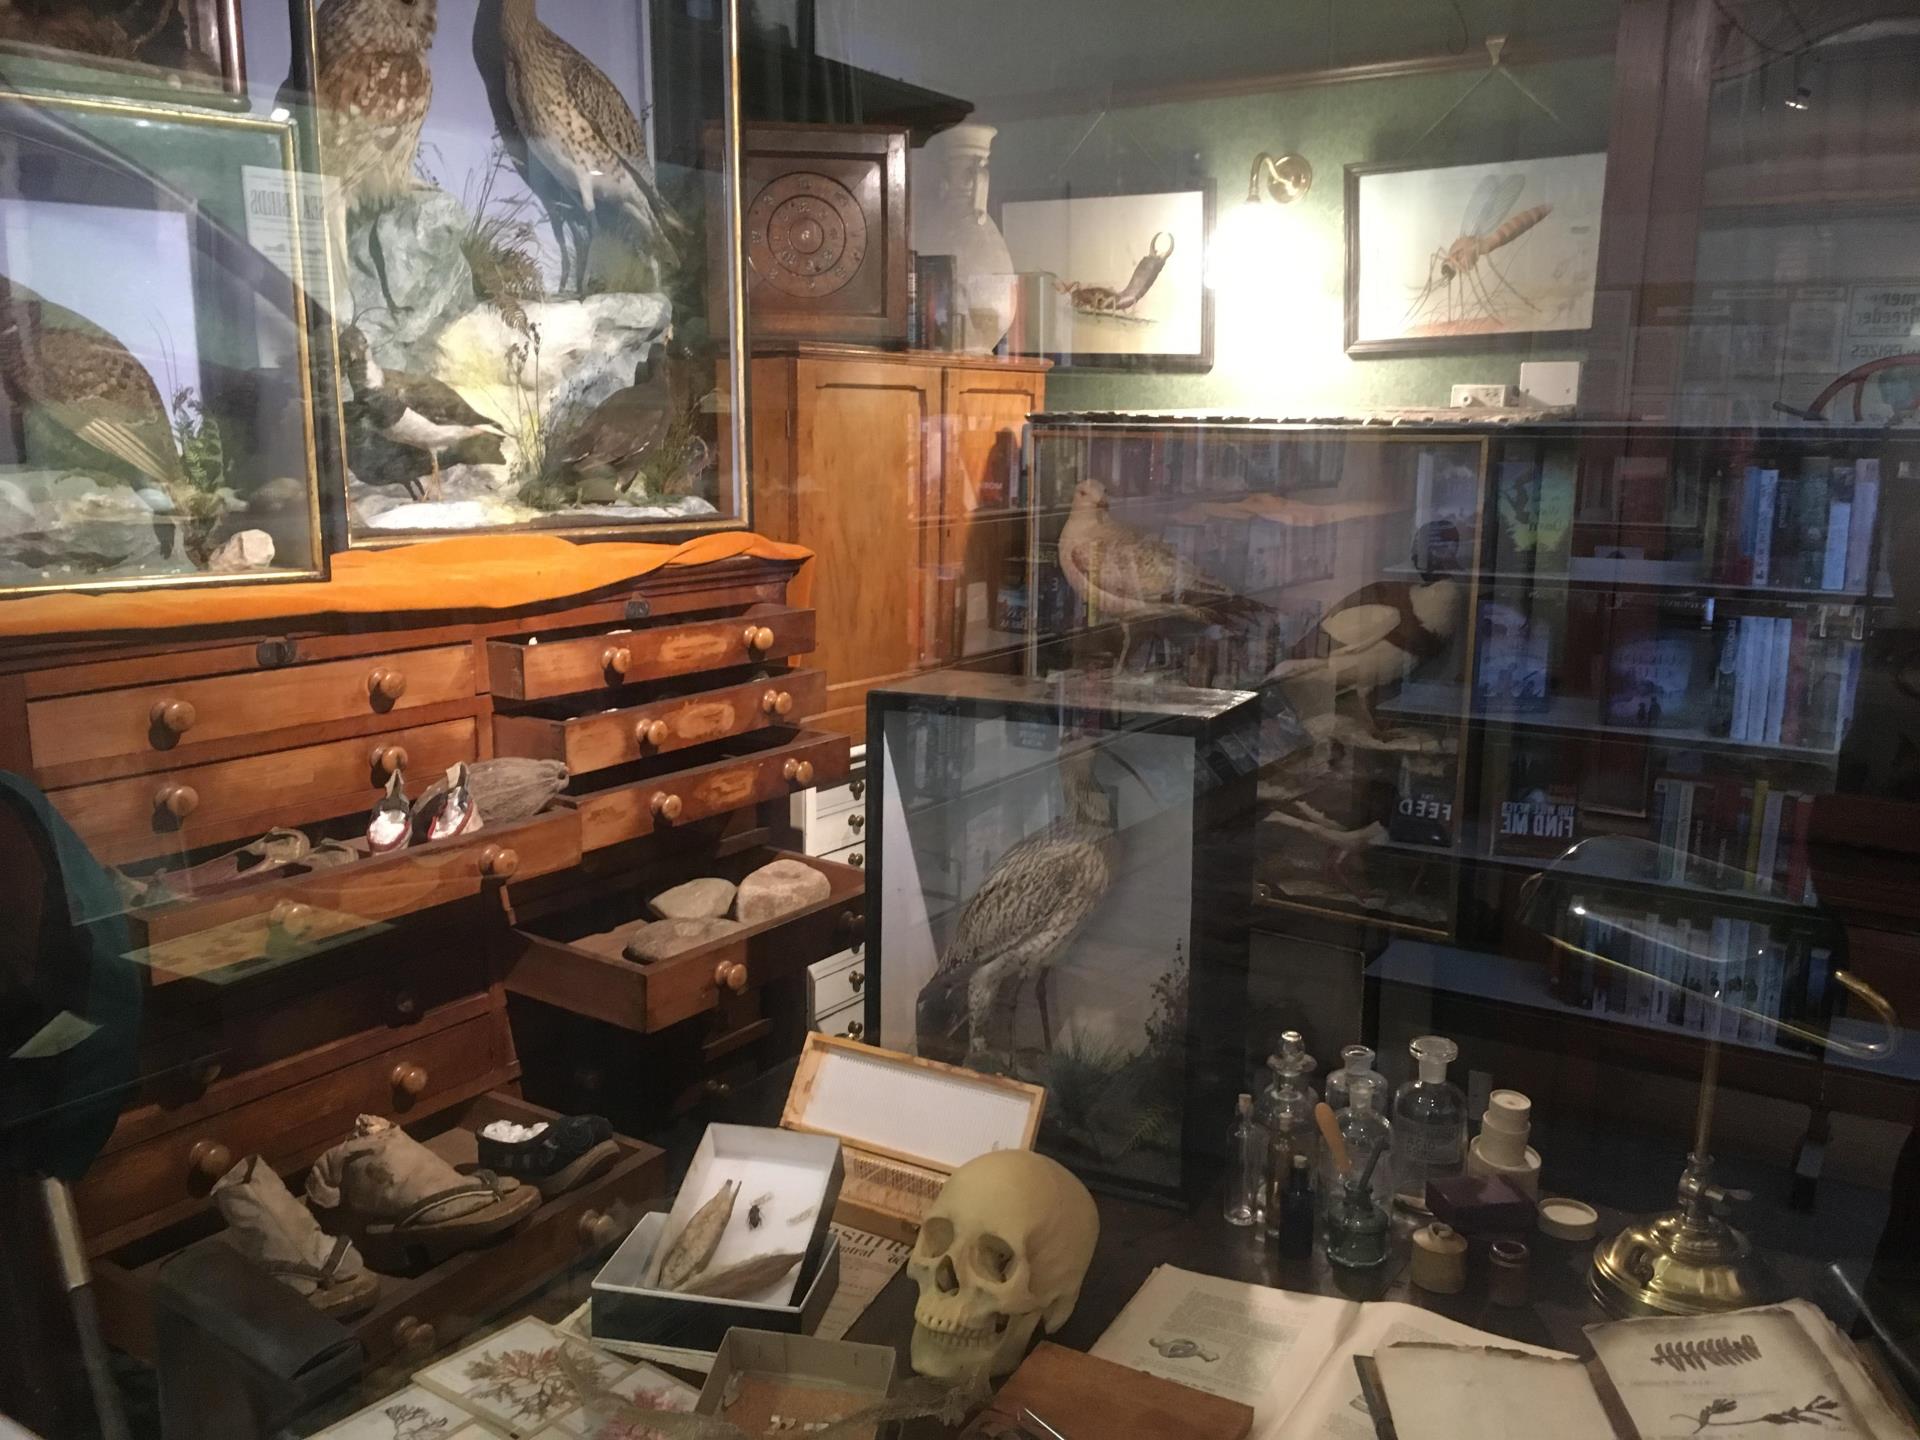 Inside the Naturalist's study